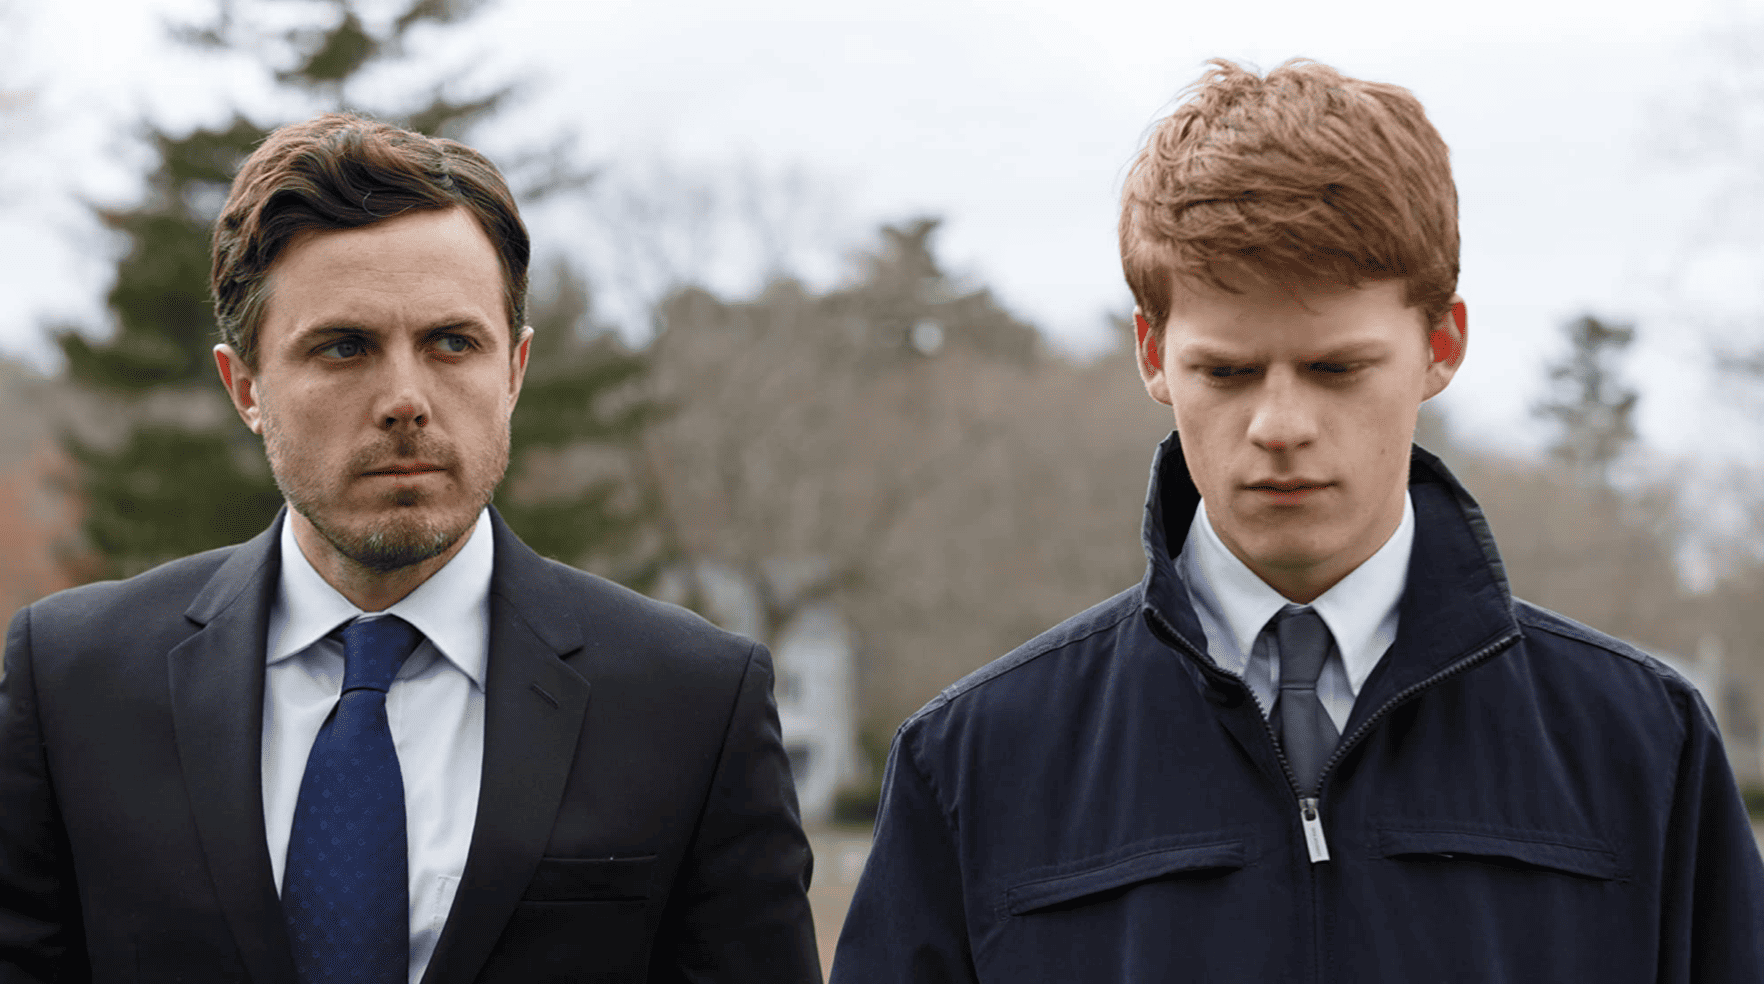 A man and teenager stand in suits outside in this image from Amazon Studios